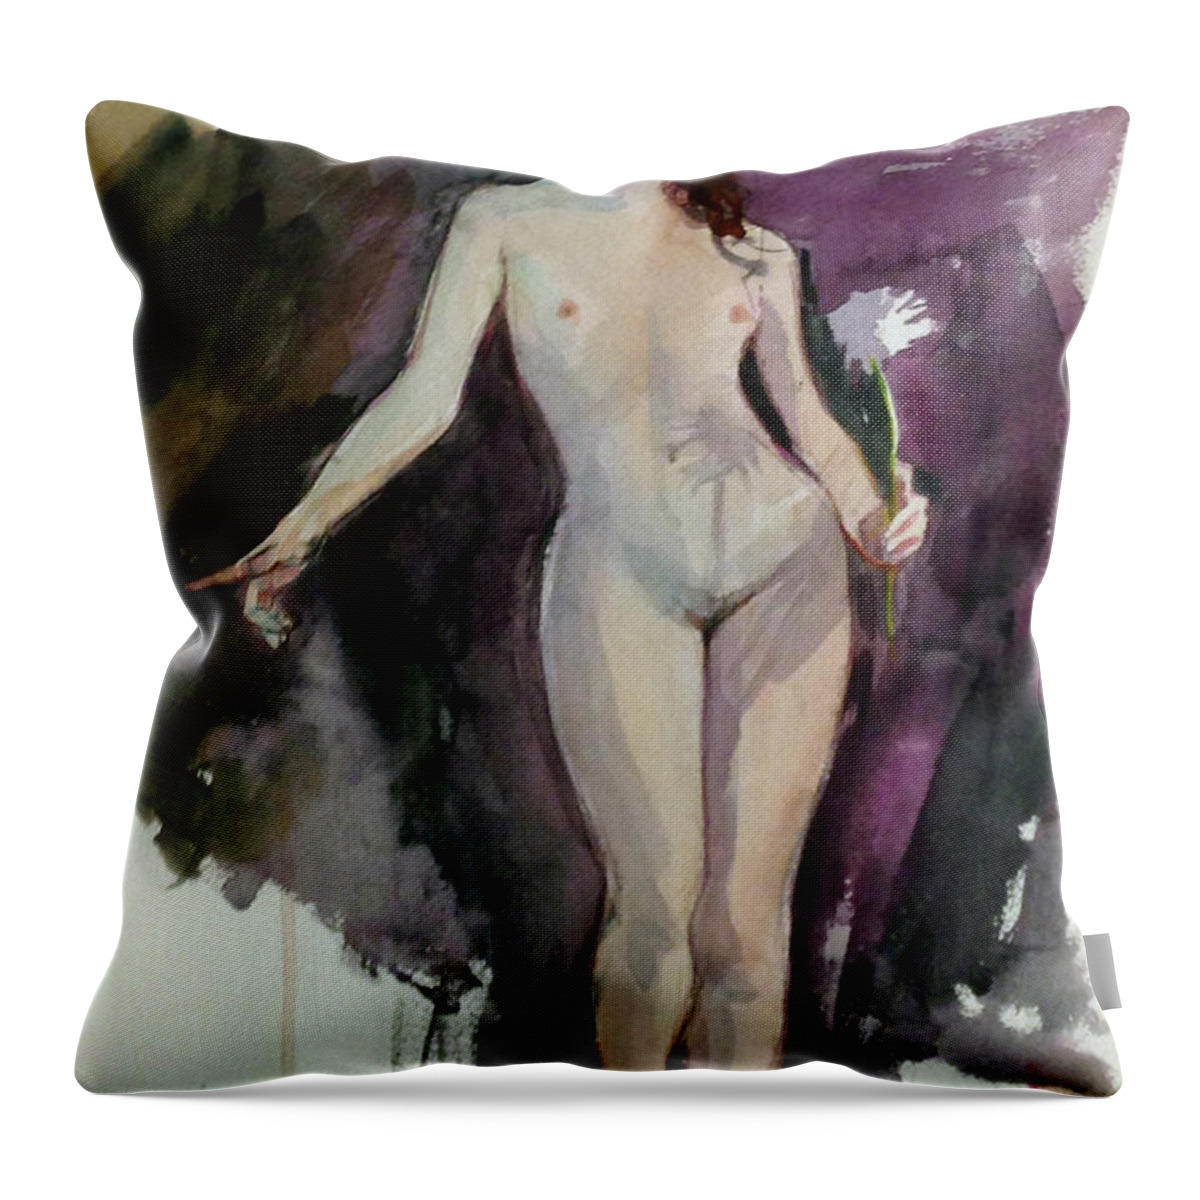 Watercolor Figureseated Nudenudesfigure Sketcheswatercolor Nudewoodland Streamfigure Paintingwatercolor Paintinglight And Shadownude Modelwatercolor Sketchlife Drawing Throw Pillow featuring the painting Flower Girl by Mark Lunde